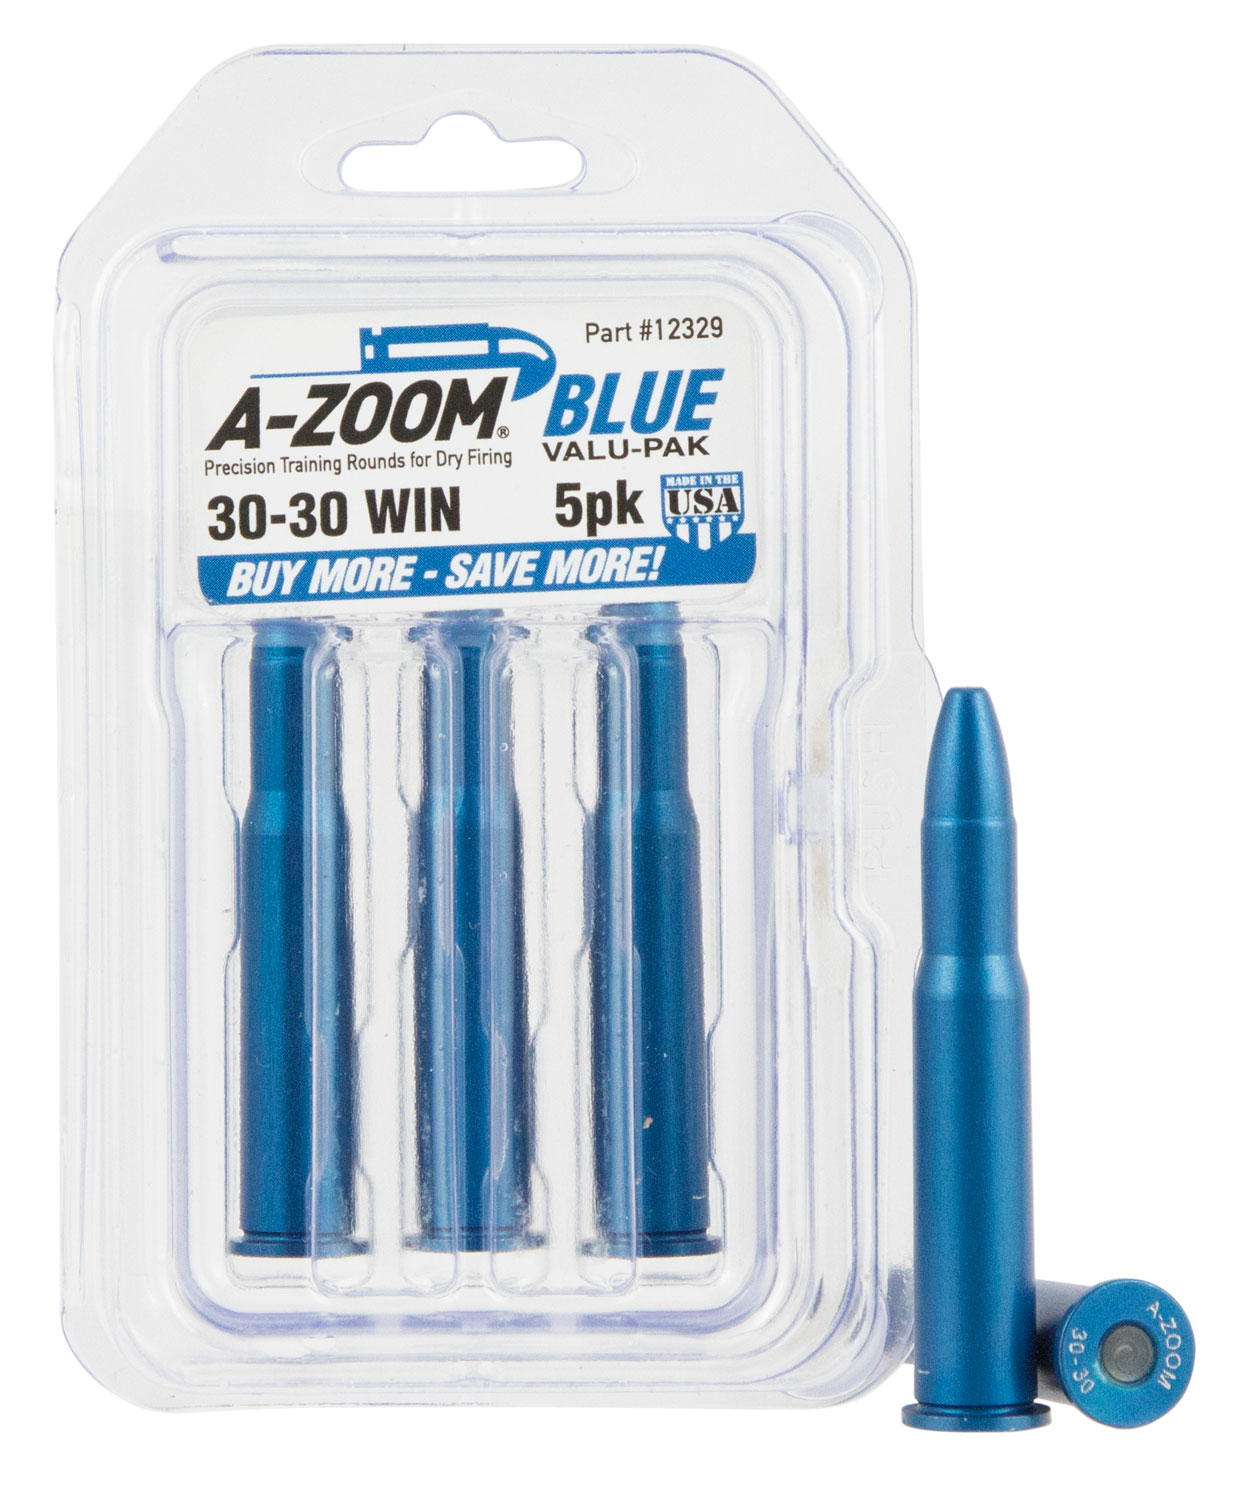 A-Zoom 12329 Value Pack Rifle 30-30 Win Aluminum 5 Pk